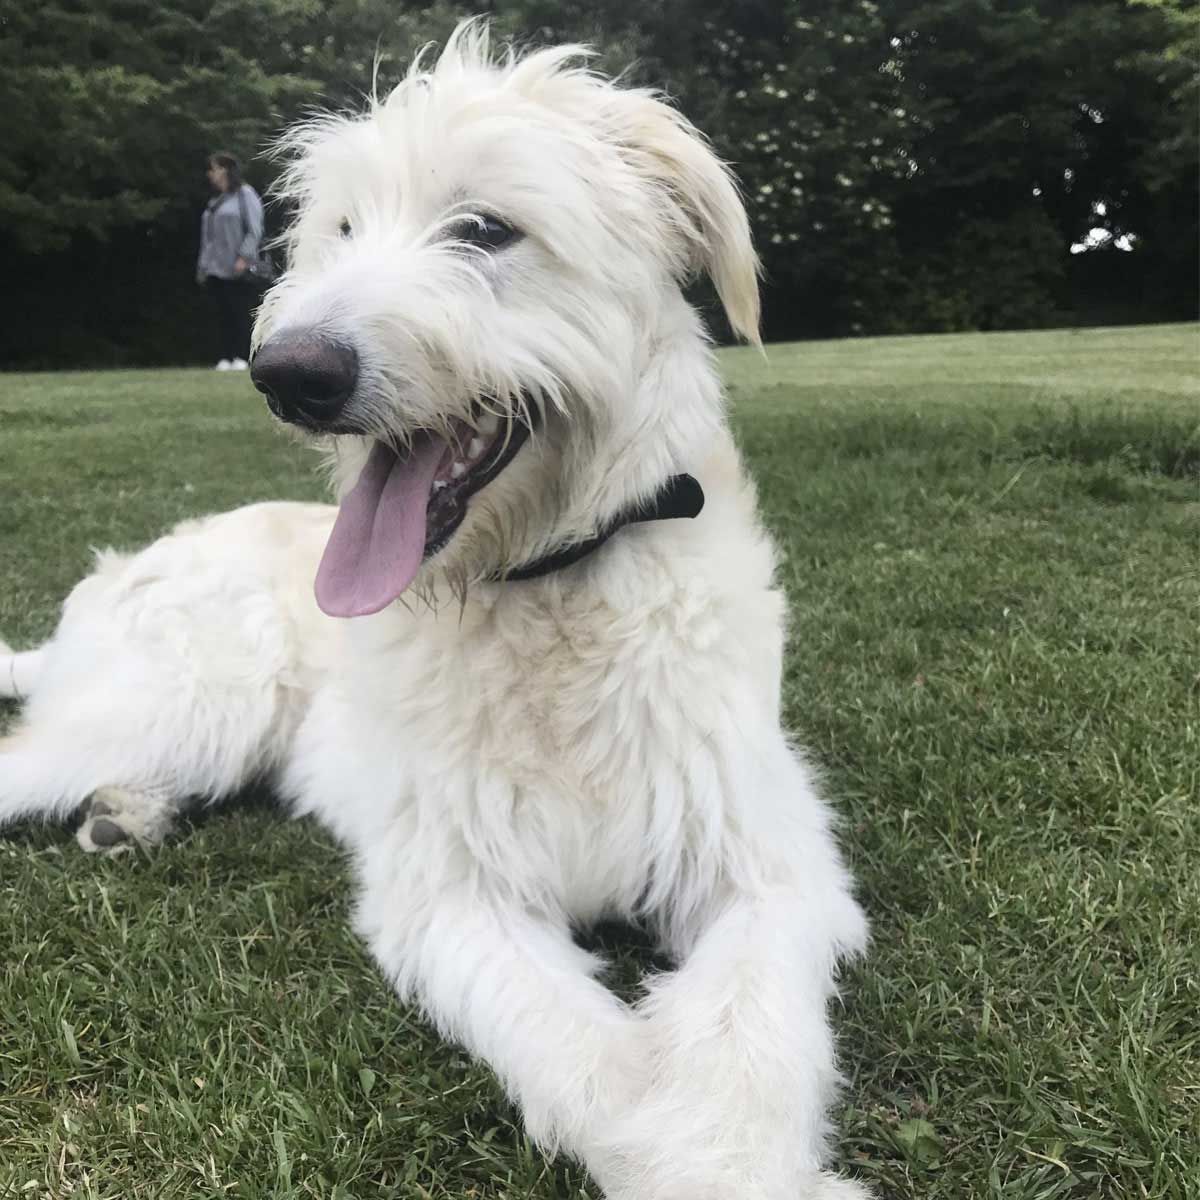 Doggy member Bear is a pure white Irish Wolfhound, pictured lying on grass